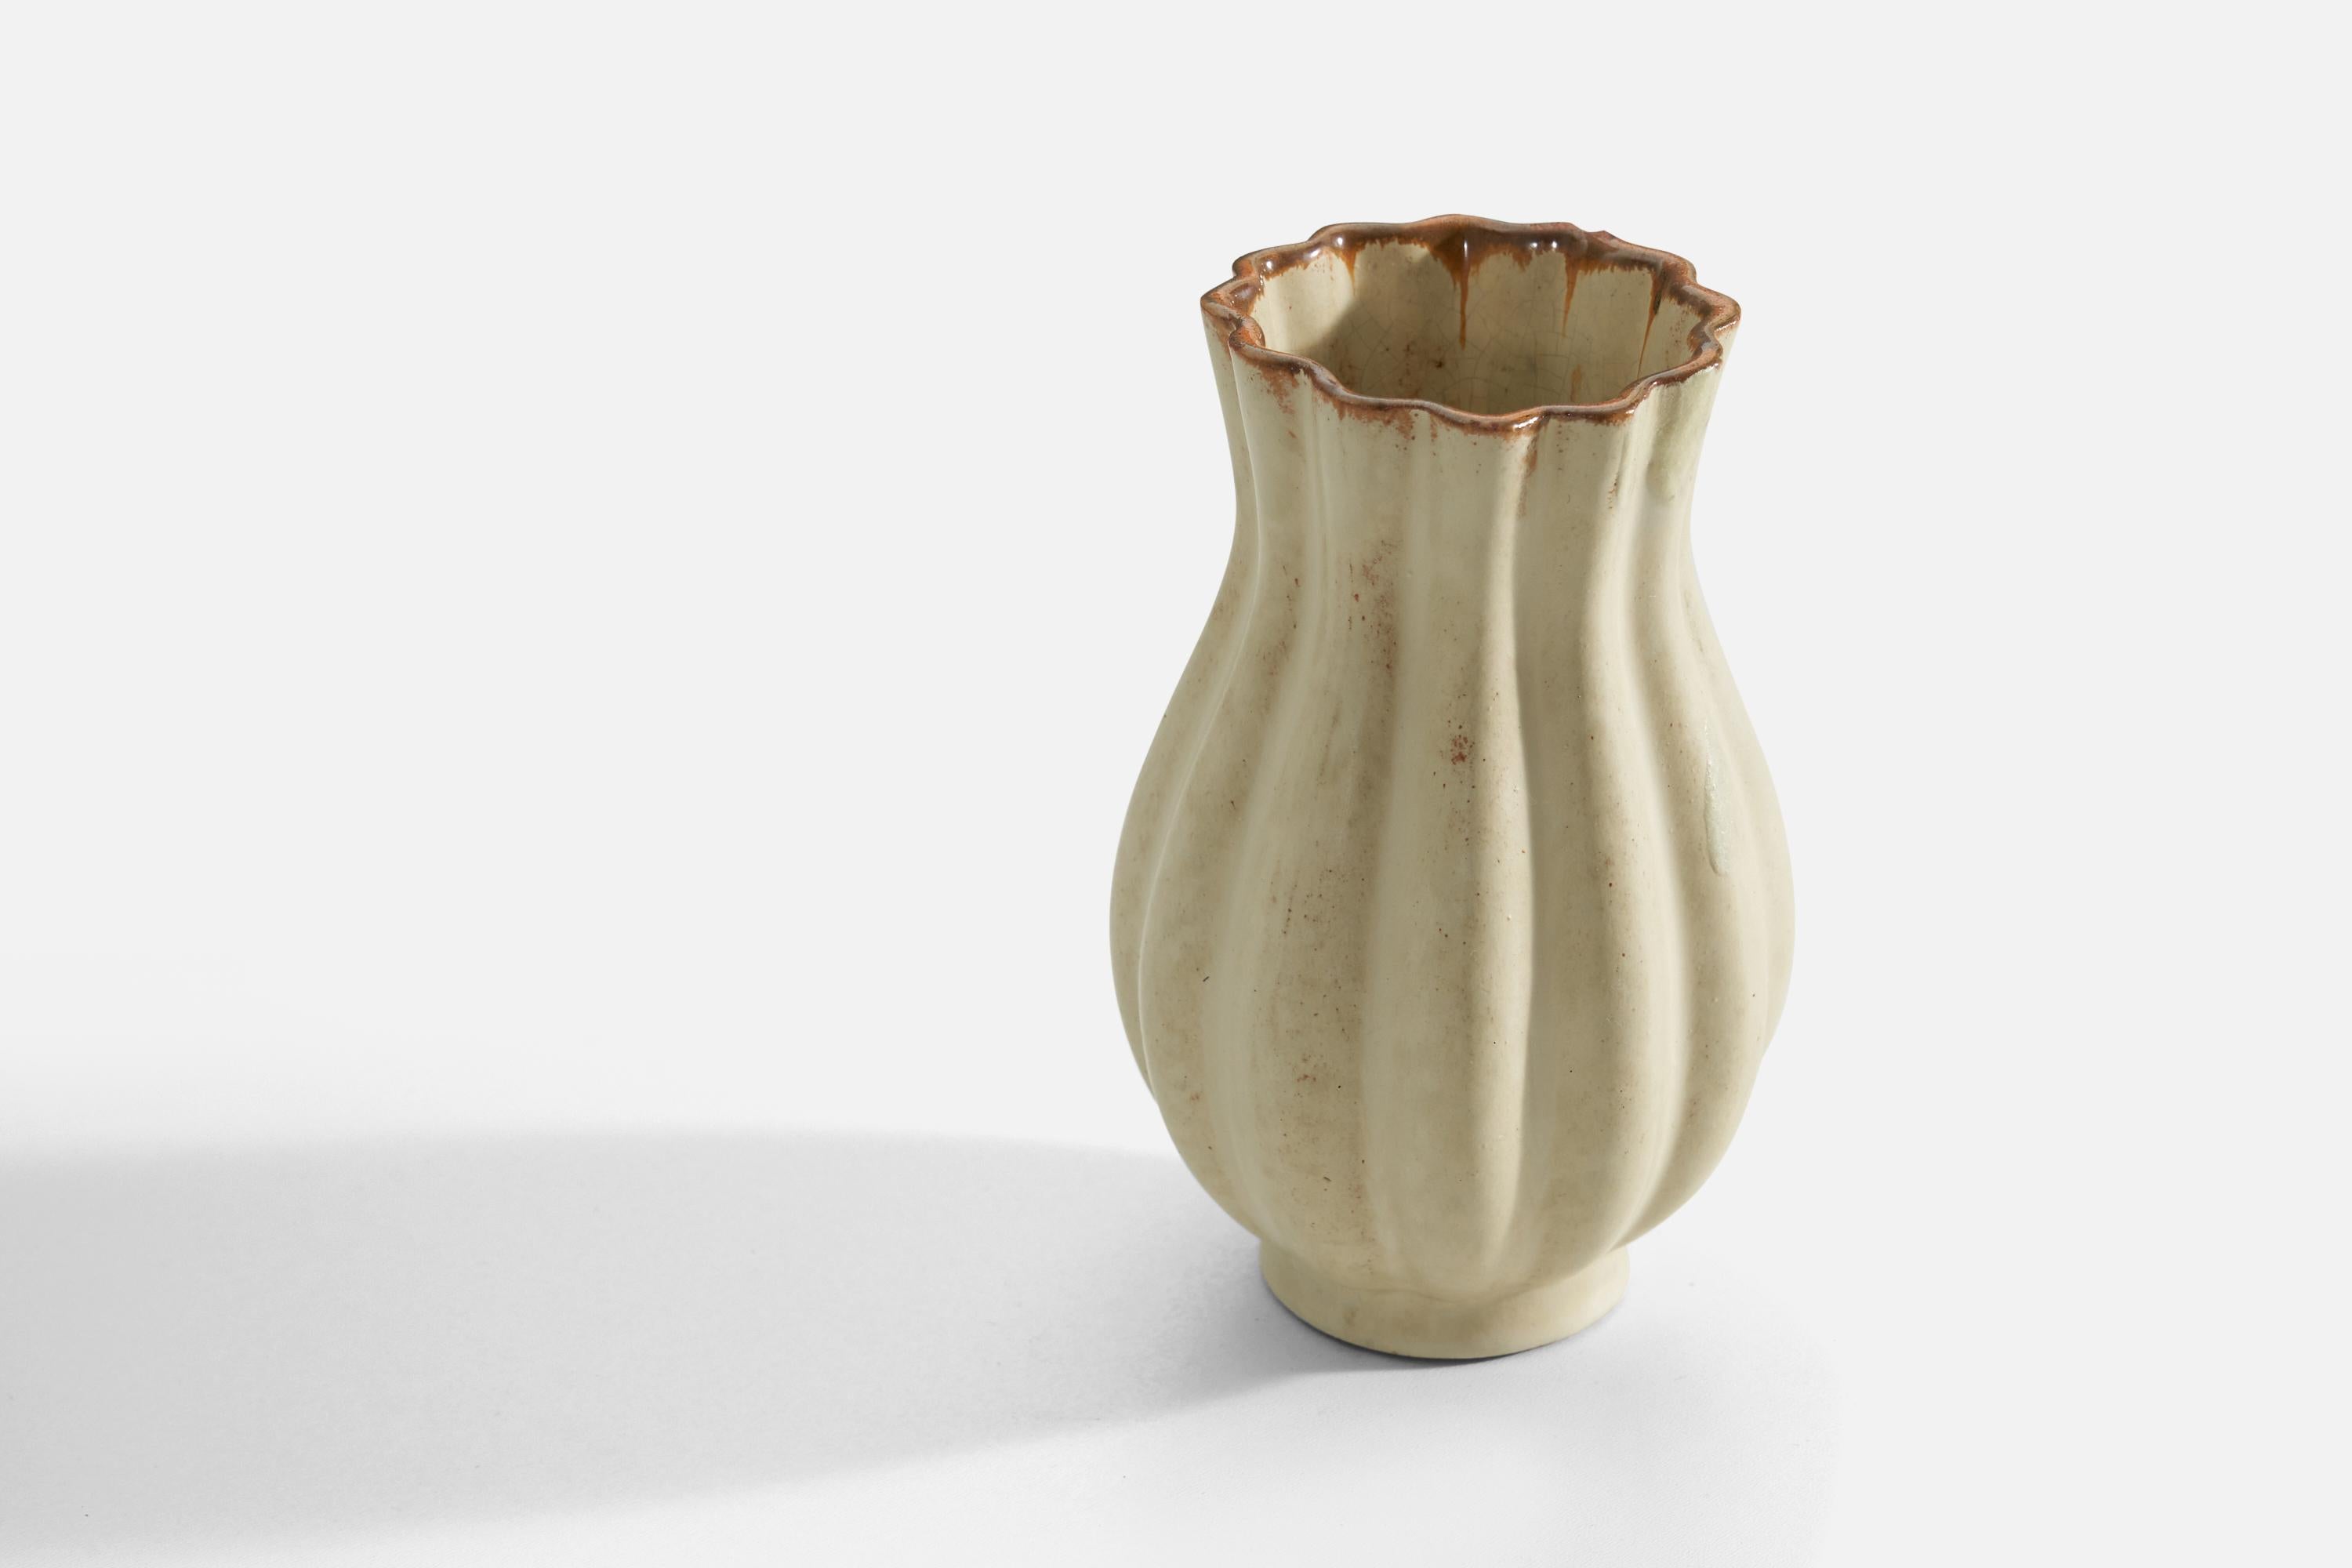 A vase. Produced by Upsala-Ekeby, Sweden, 1940s. Earthenware.

Other designers of the period include Ettore Sottsass, Carl Harry Stålhane, Lisa Larsson, Axel Salto, and Arne Bang.